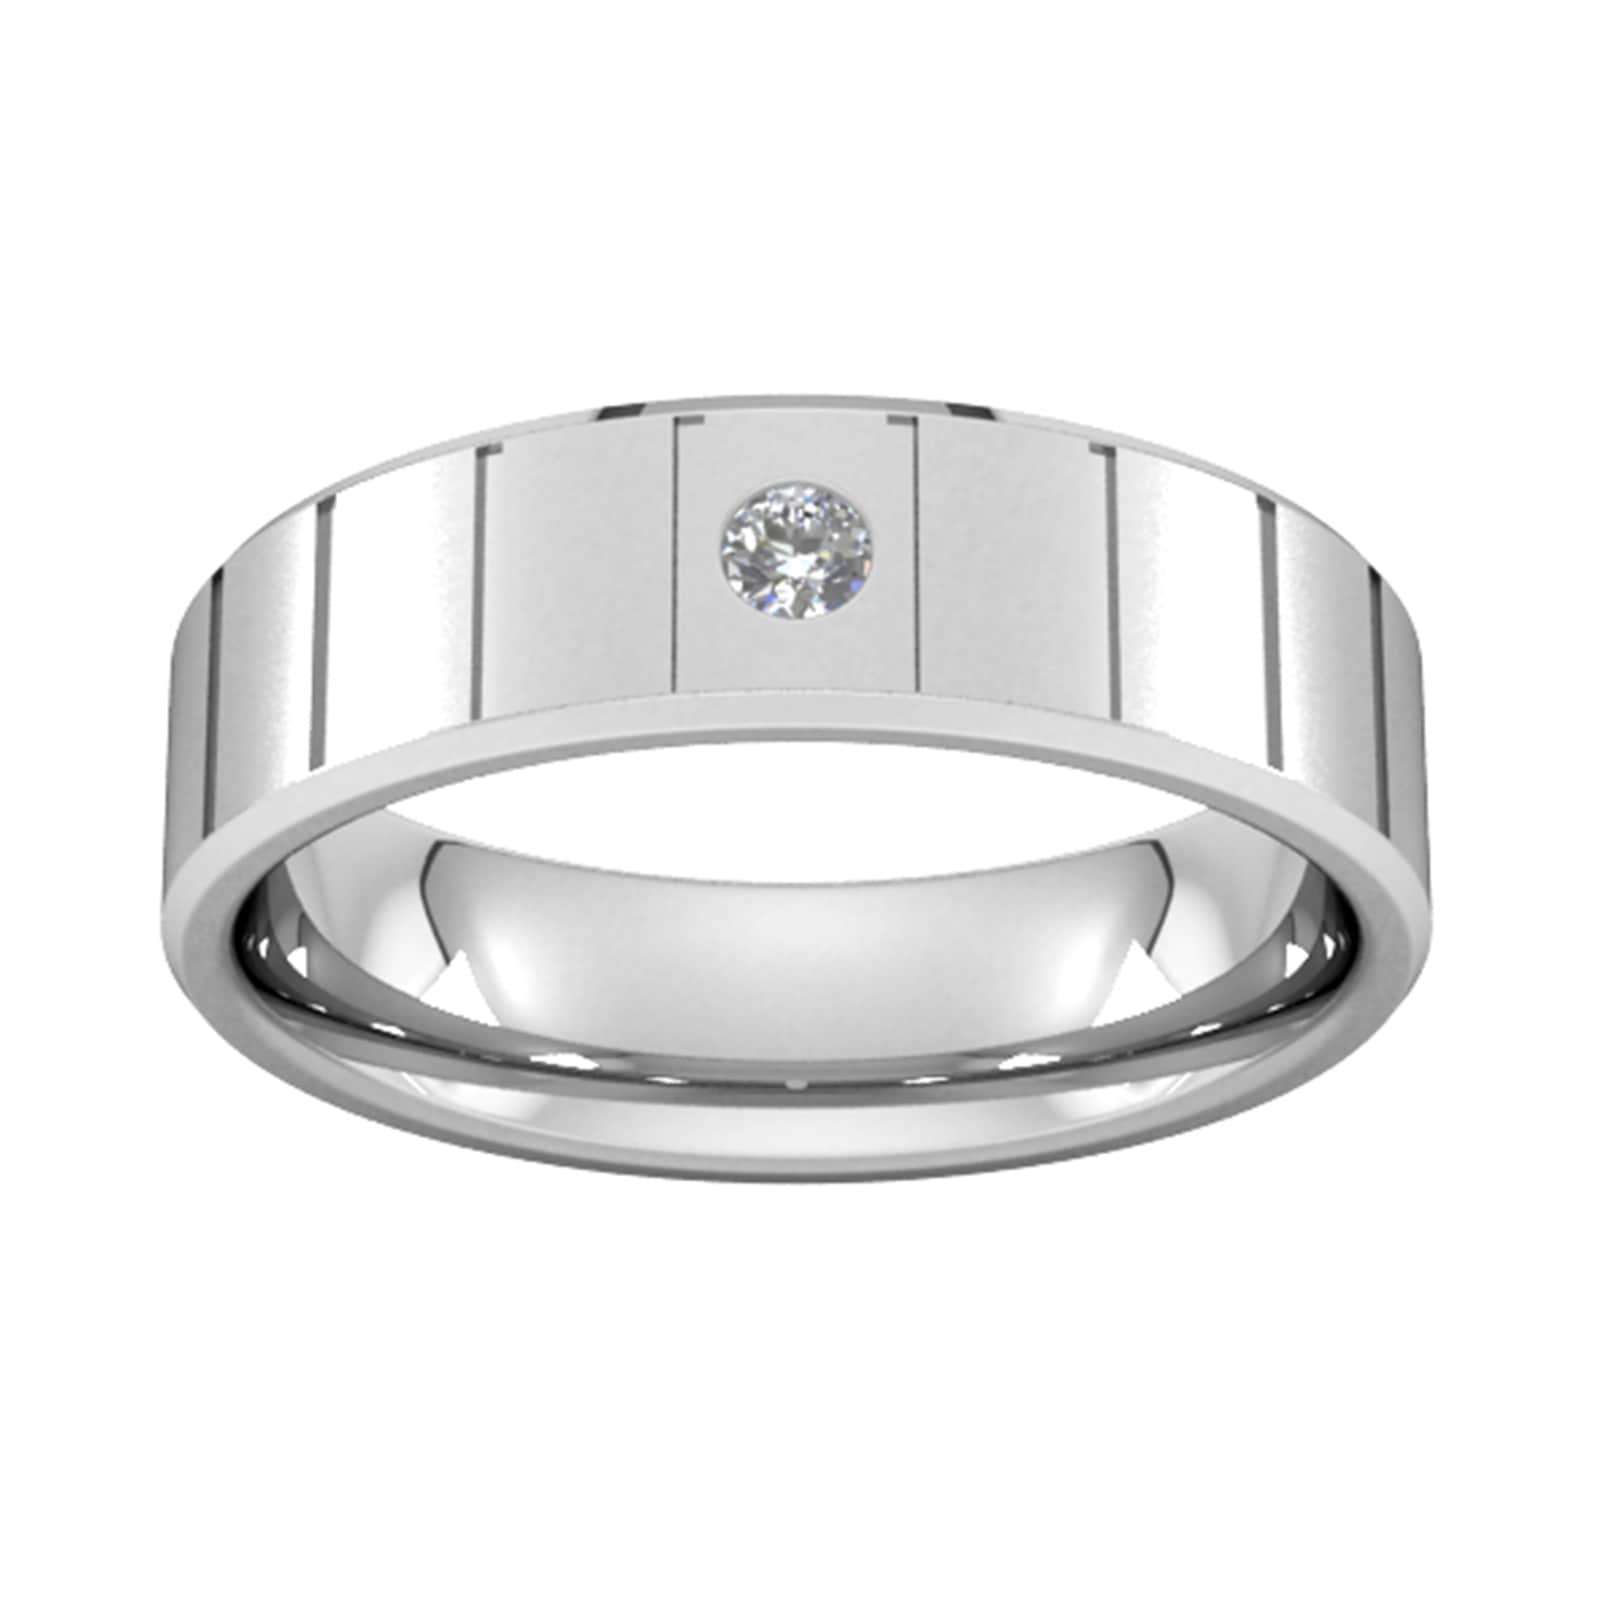 6mm Brilliant Cut Diamond Set With Vertical Lines Wedding Ring In 18 Carat White Gold - Ring Size Q